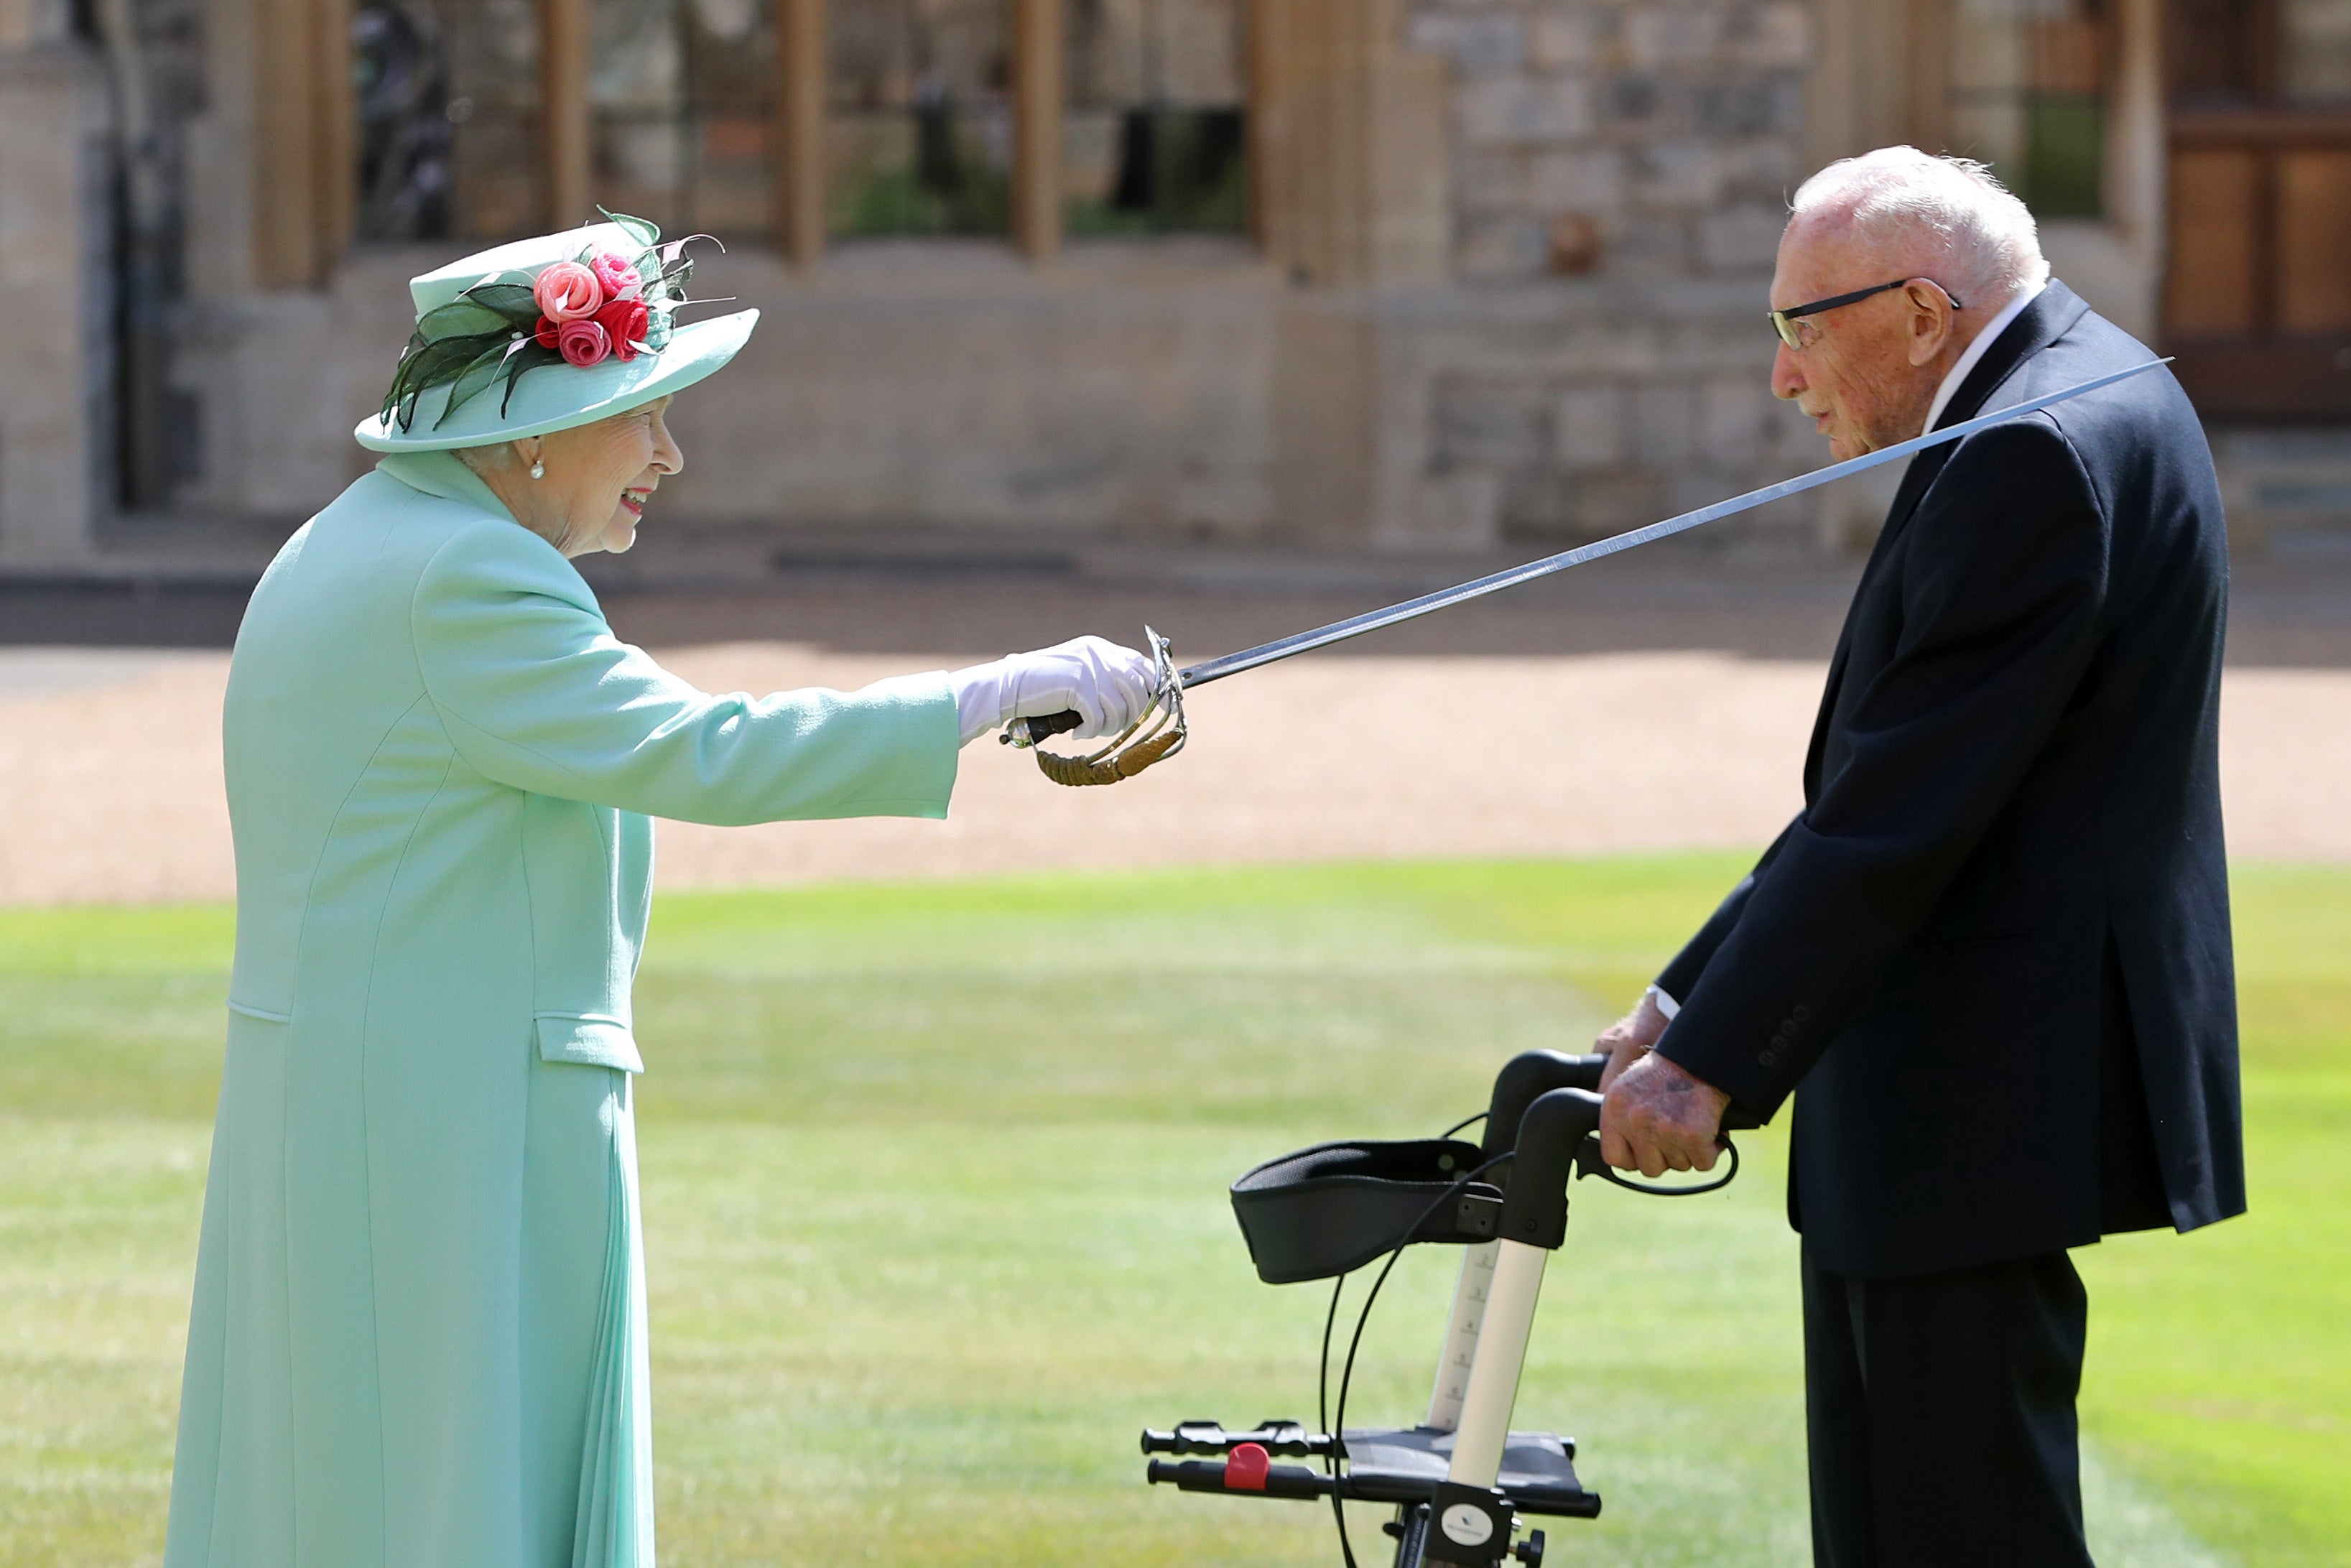 Captain Sir Tom Moore was knighted by the Queen following his charity work (Chris Jackson/PA)